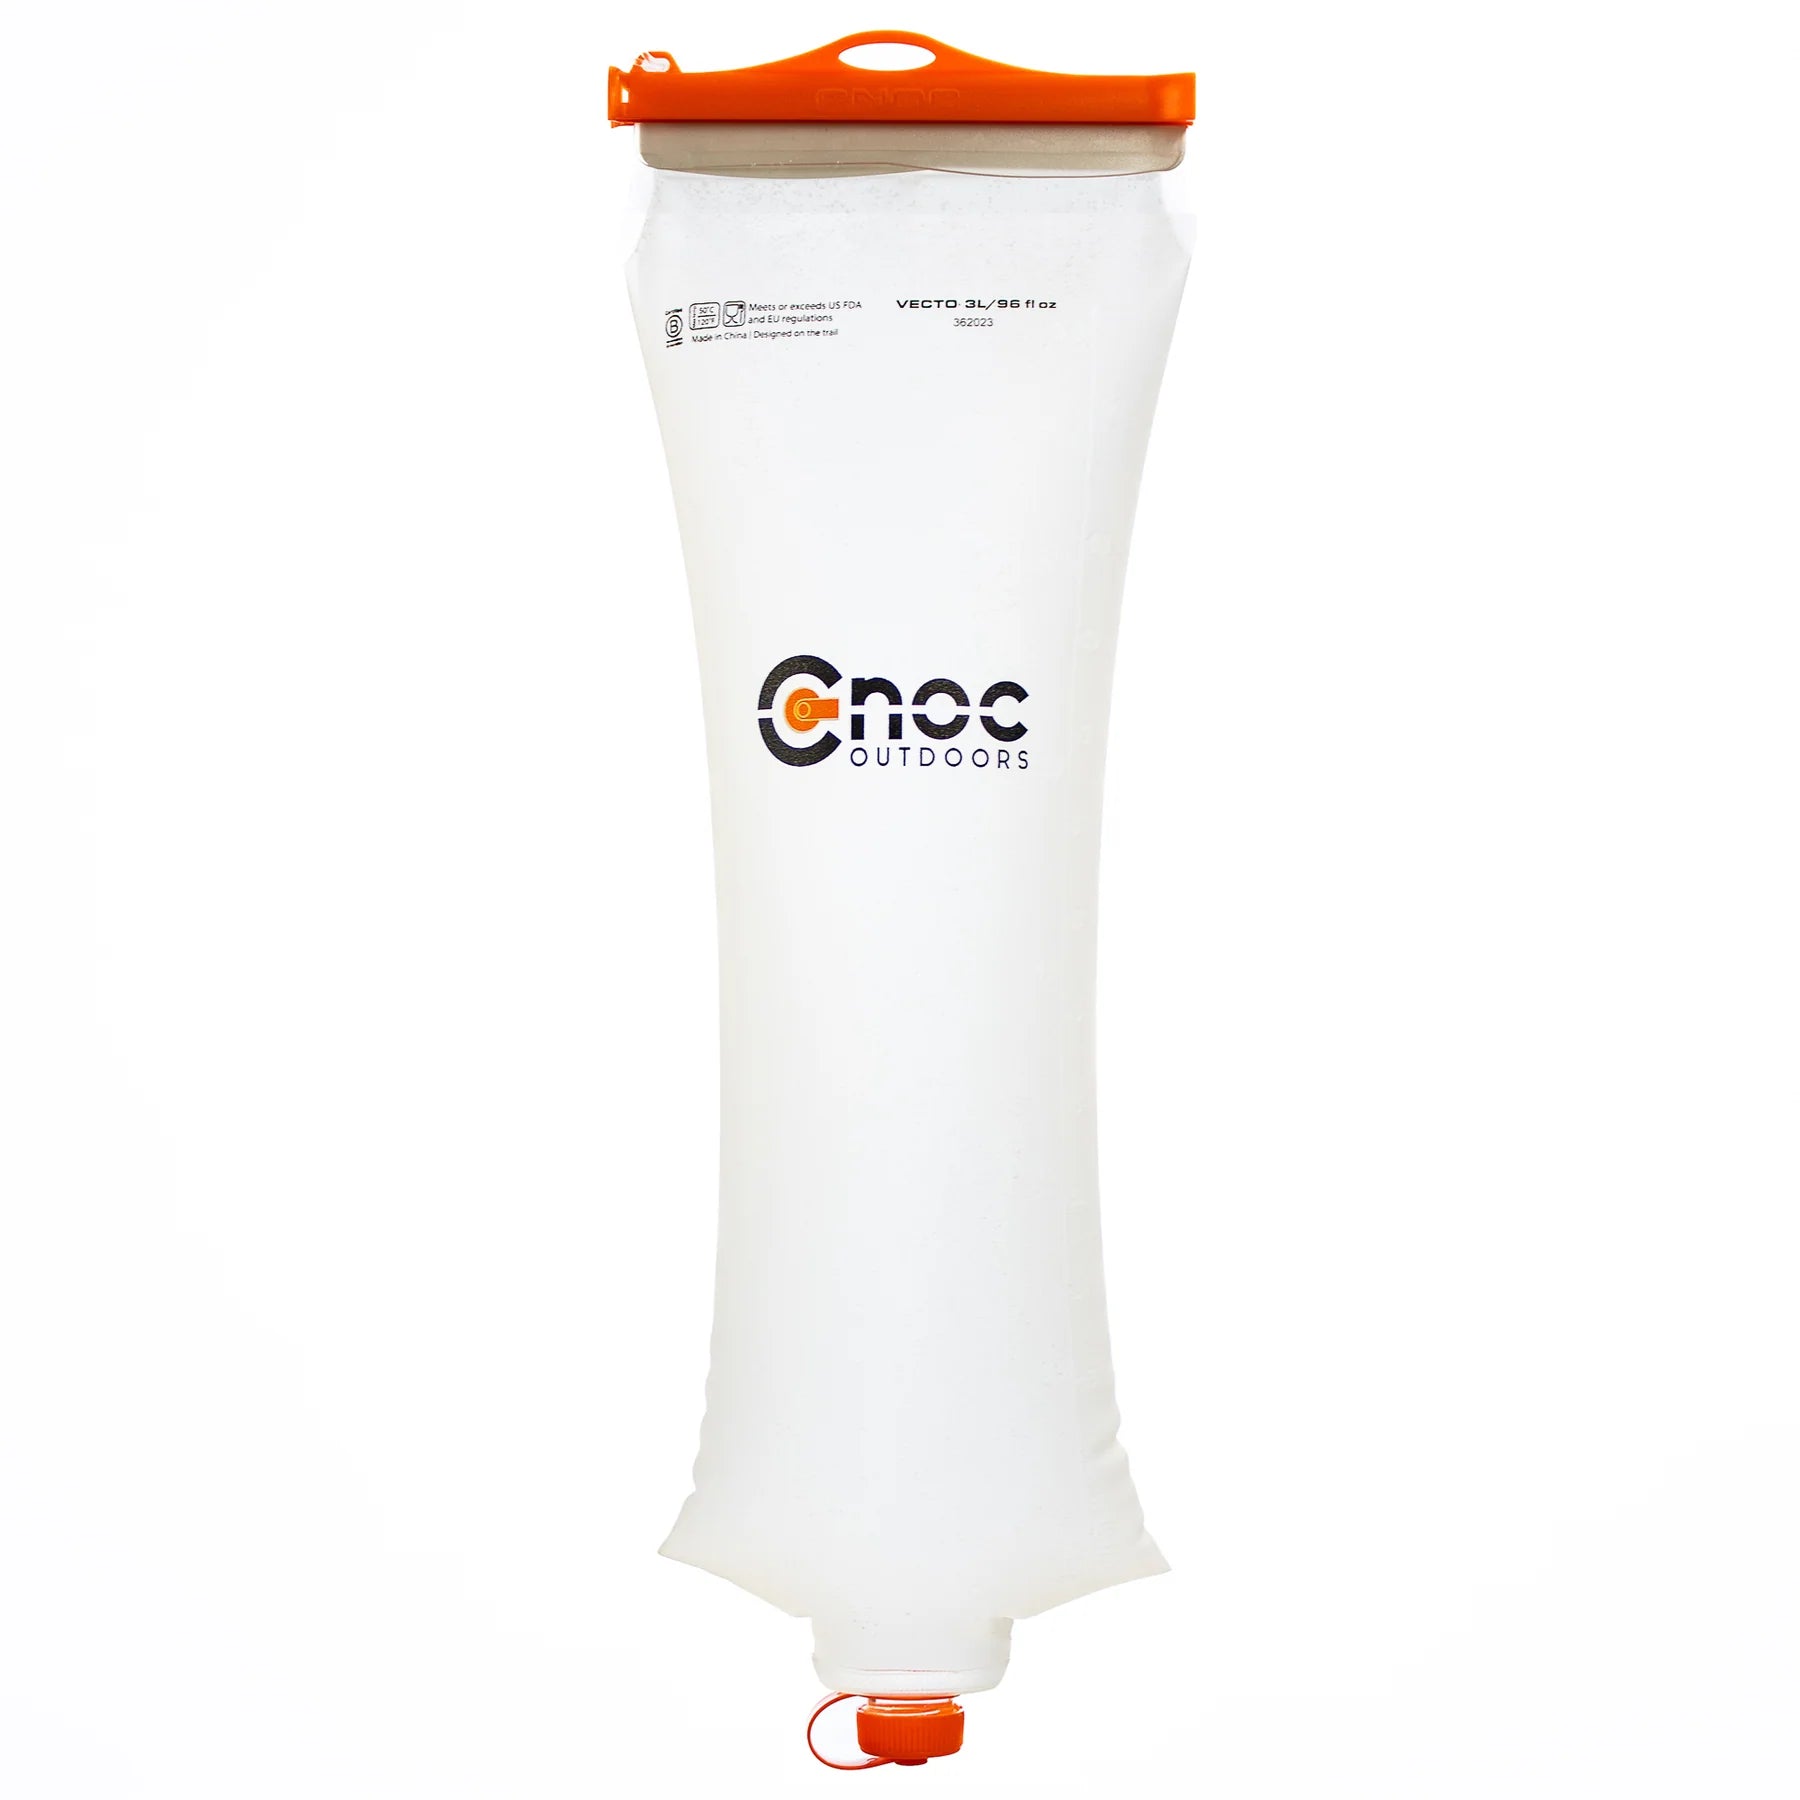 CNOC 28mm Vecto Water Container - 3L